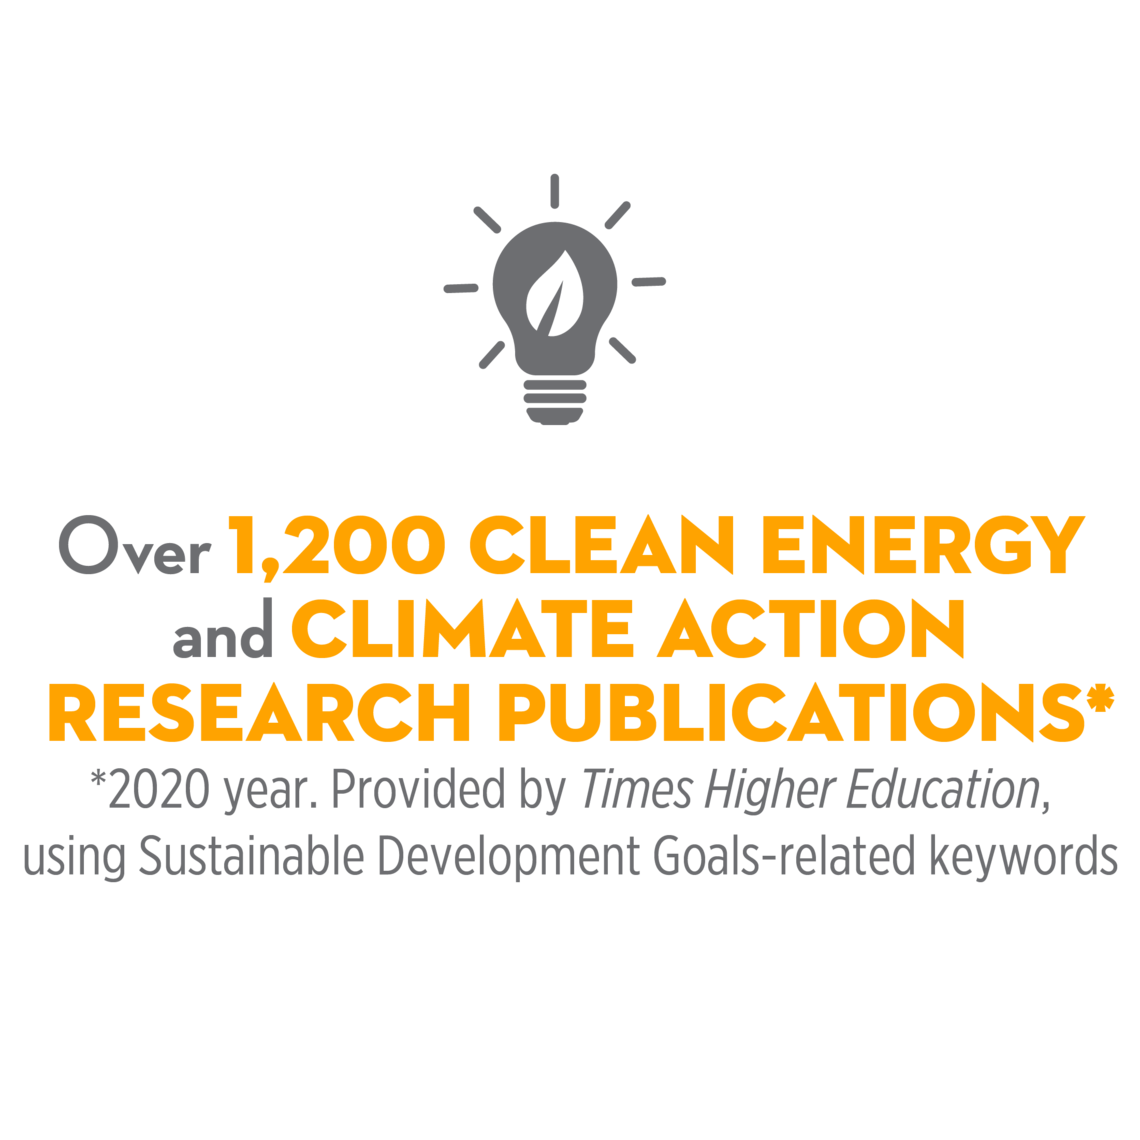 Over 1,200 Clean Energy and Climate Action Research Publications